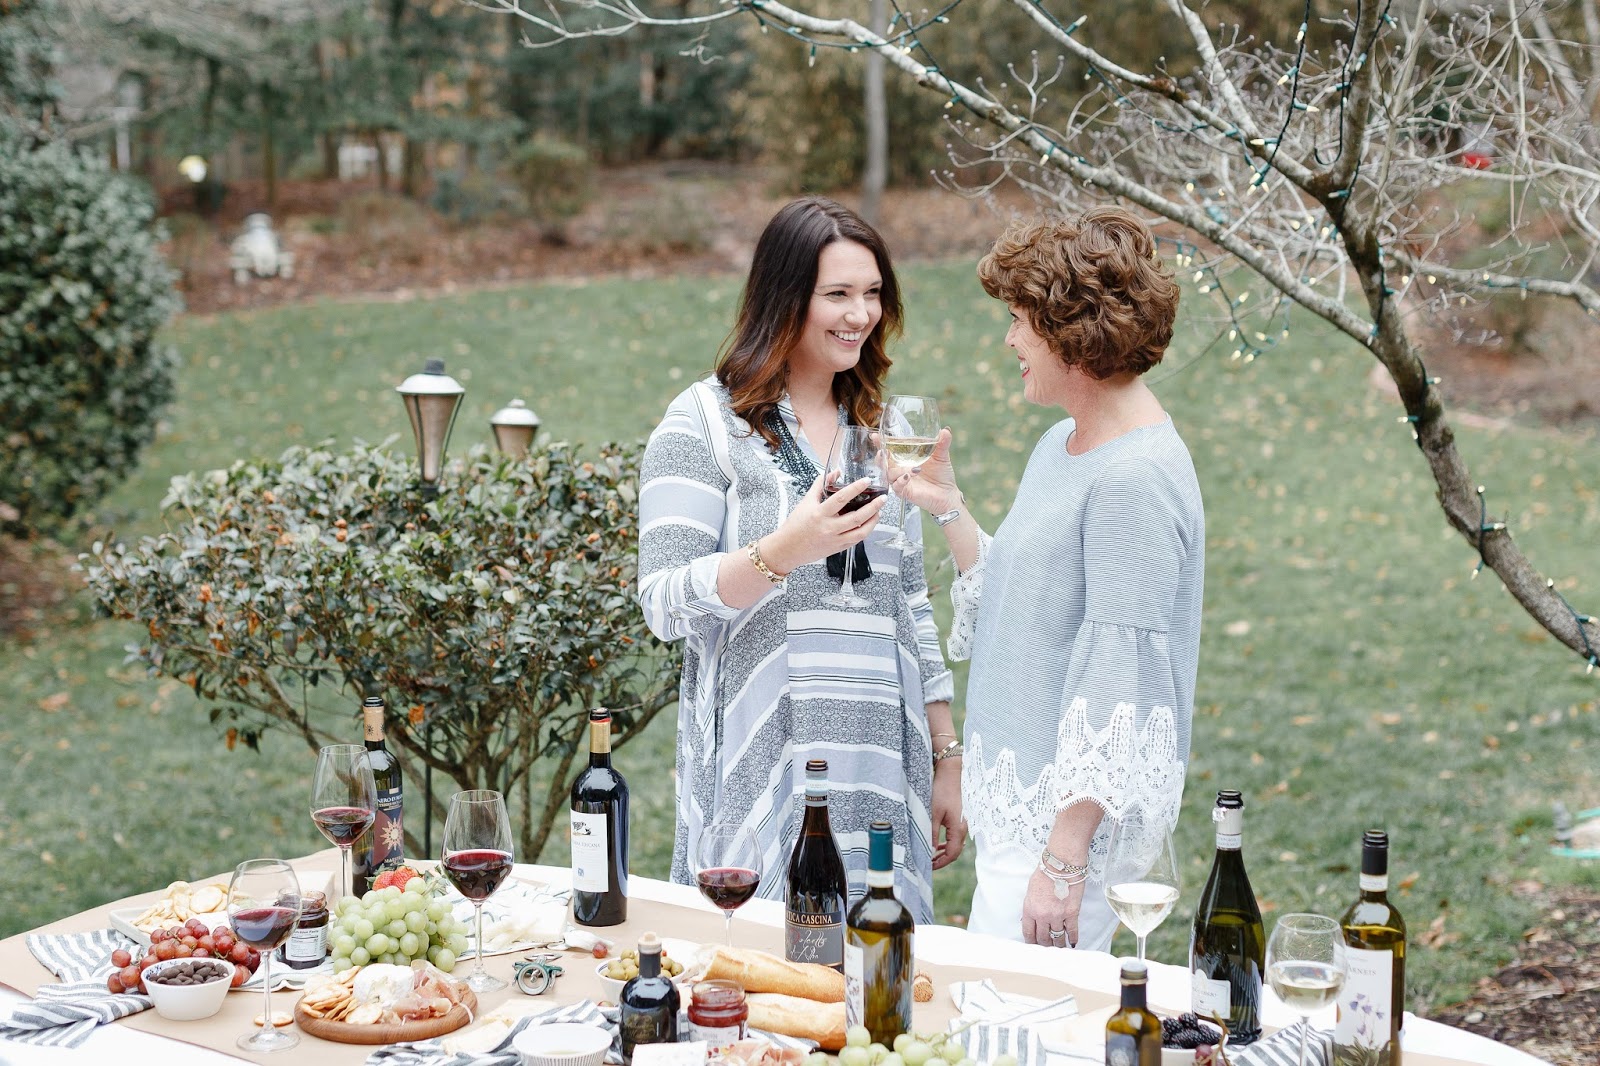 How To Plan a Gorgeous Wine and Cheese Party (without breaking the bank!)